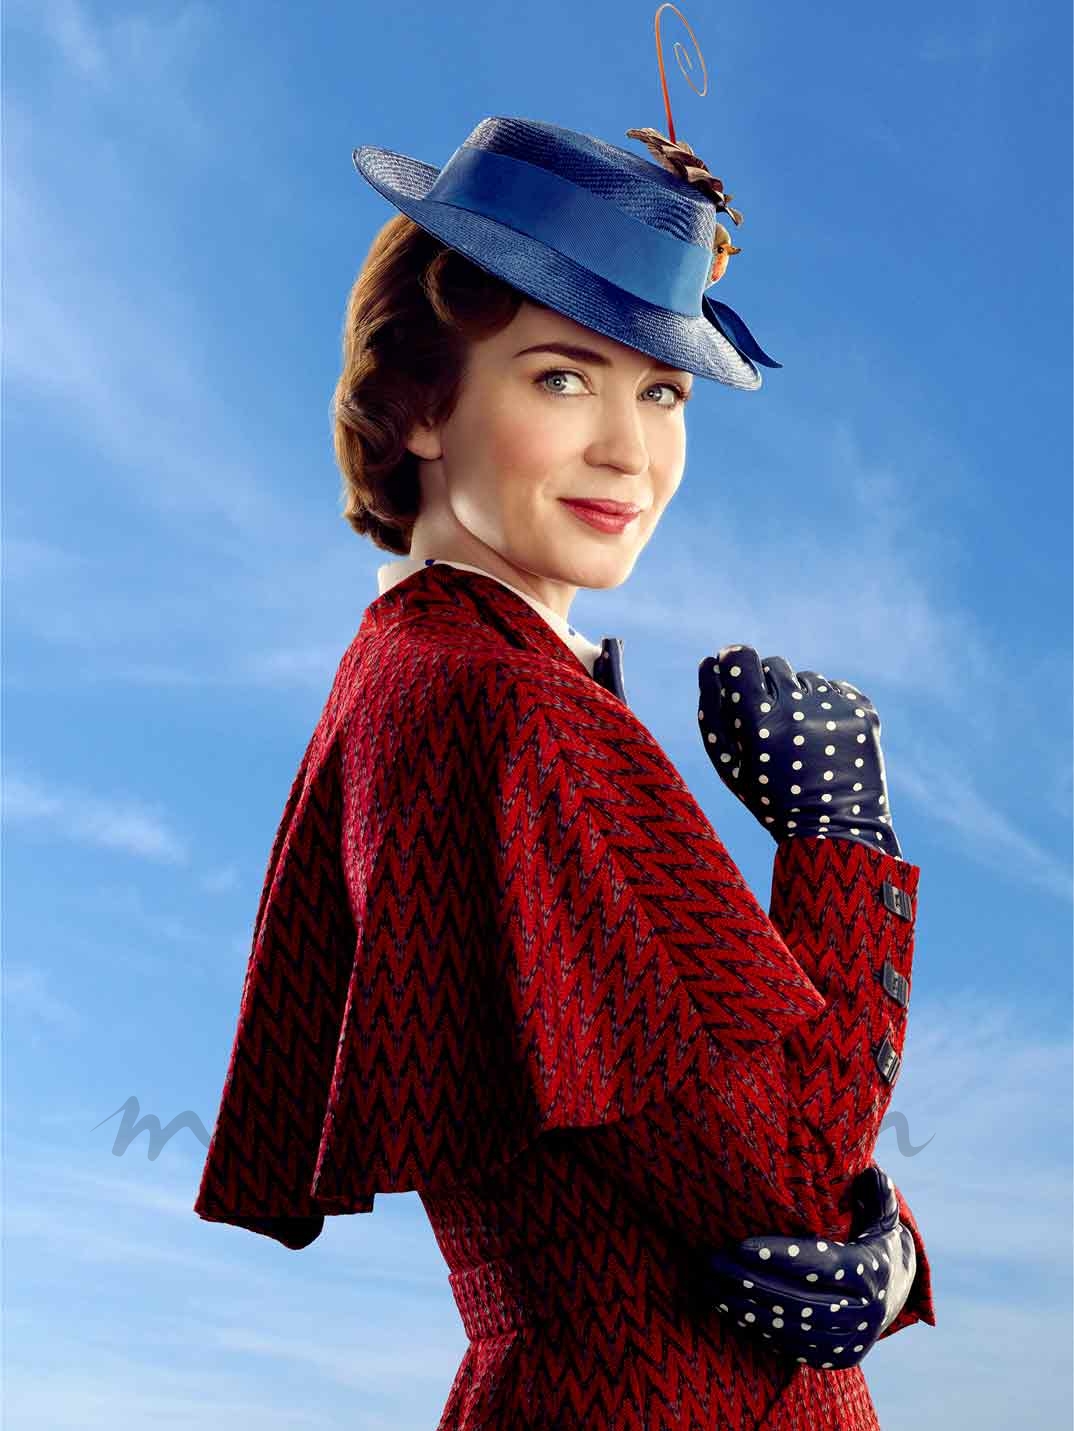 Emily Blunt - Mary Poppins